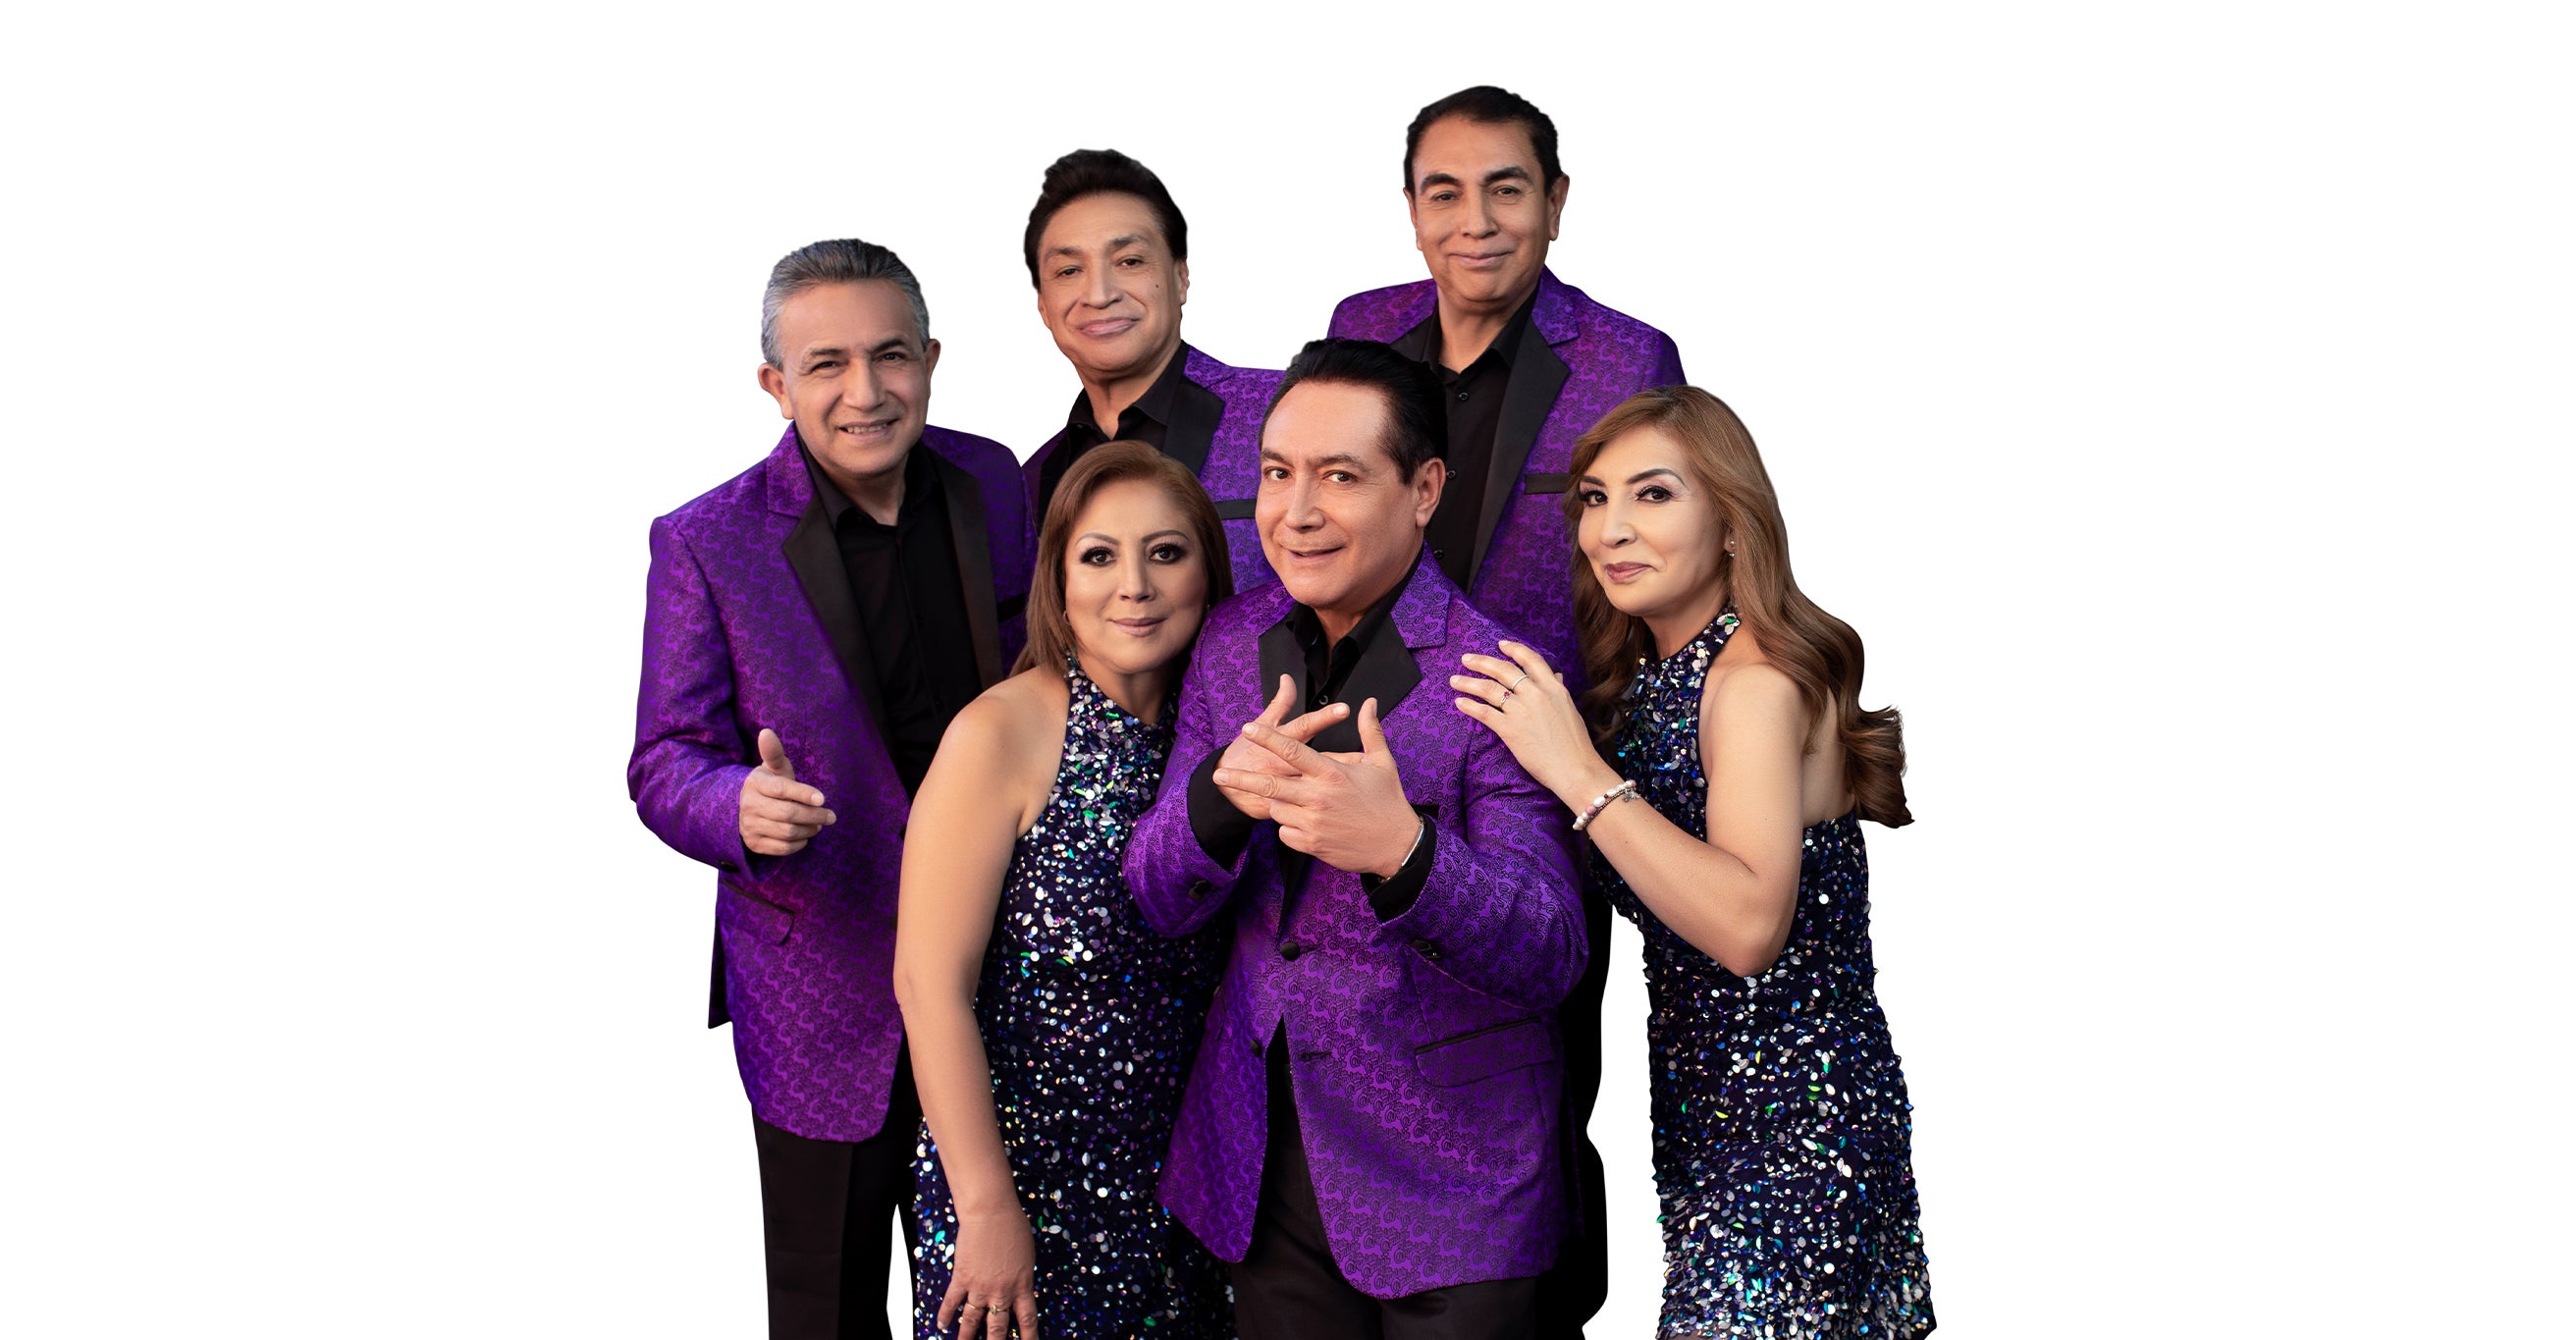 Los Angeles Azules - Cumbia para el Corazon Tour in Inglewood promo photo for Live Nation presale offer code